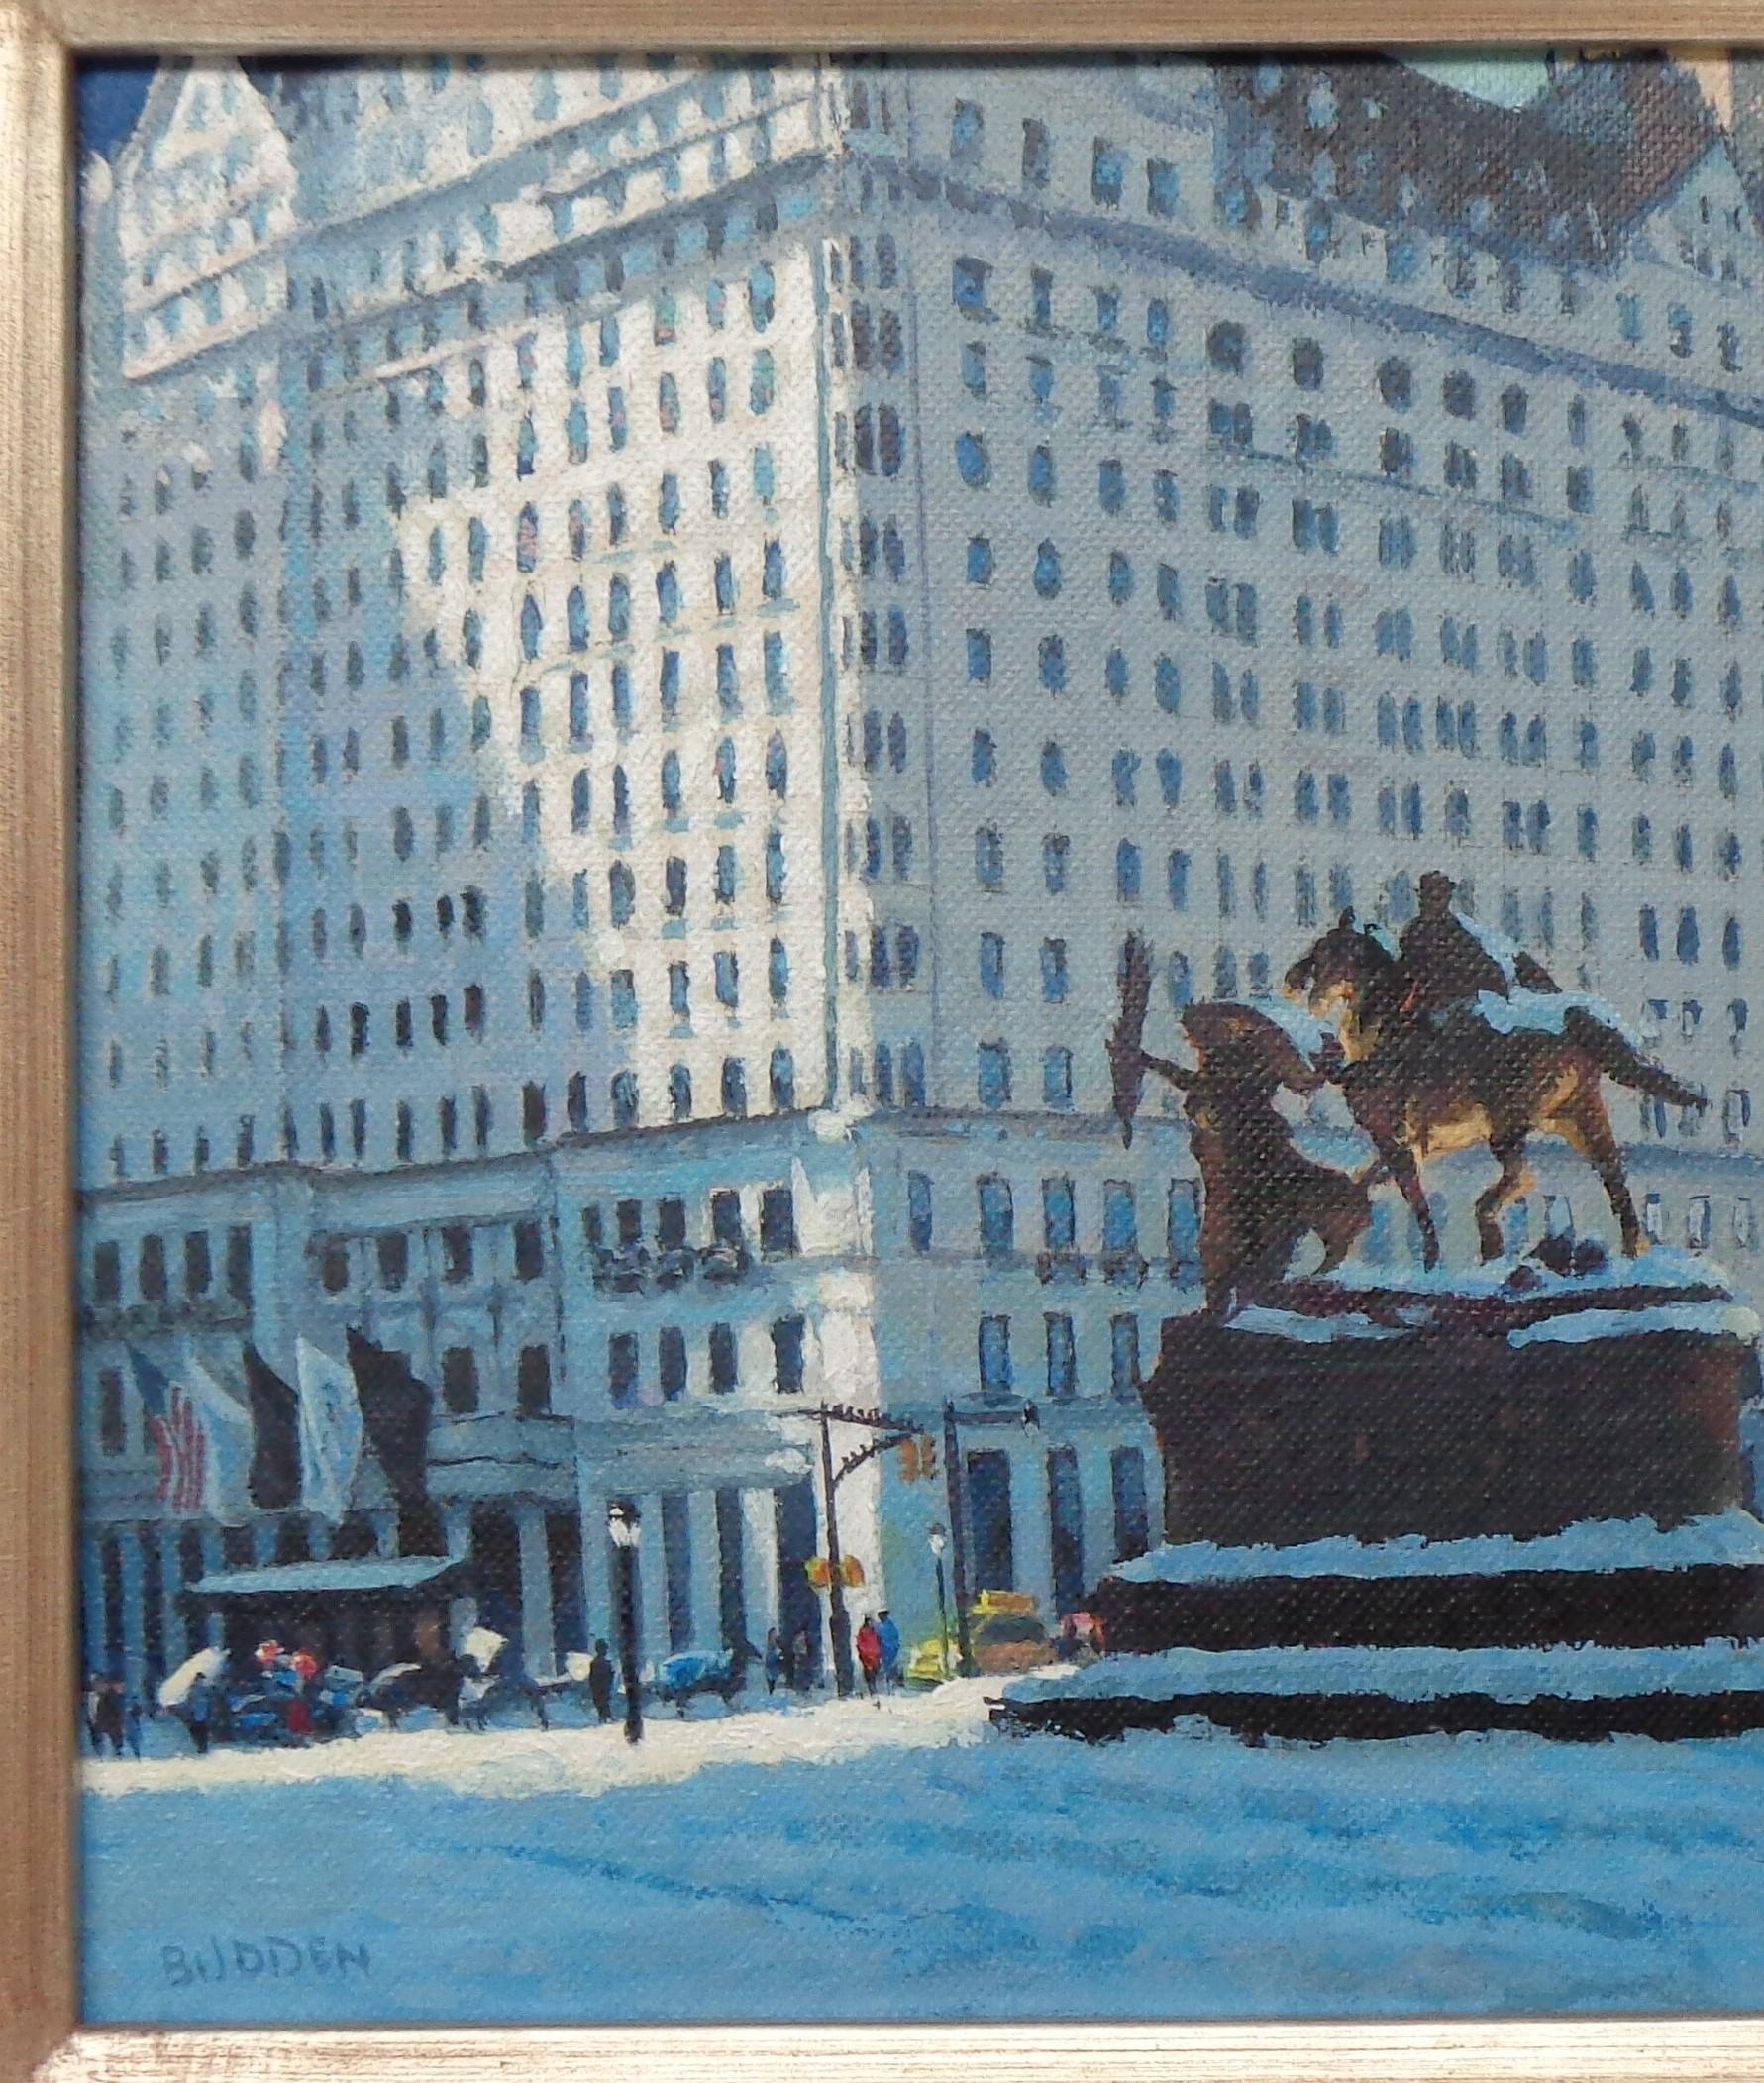  New York City Snow Painting Michael Budden Grand Army Plaza Central Park For Sale 1